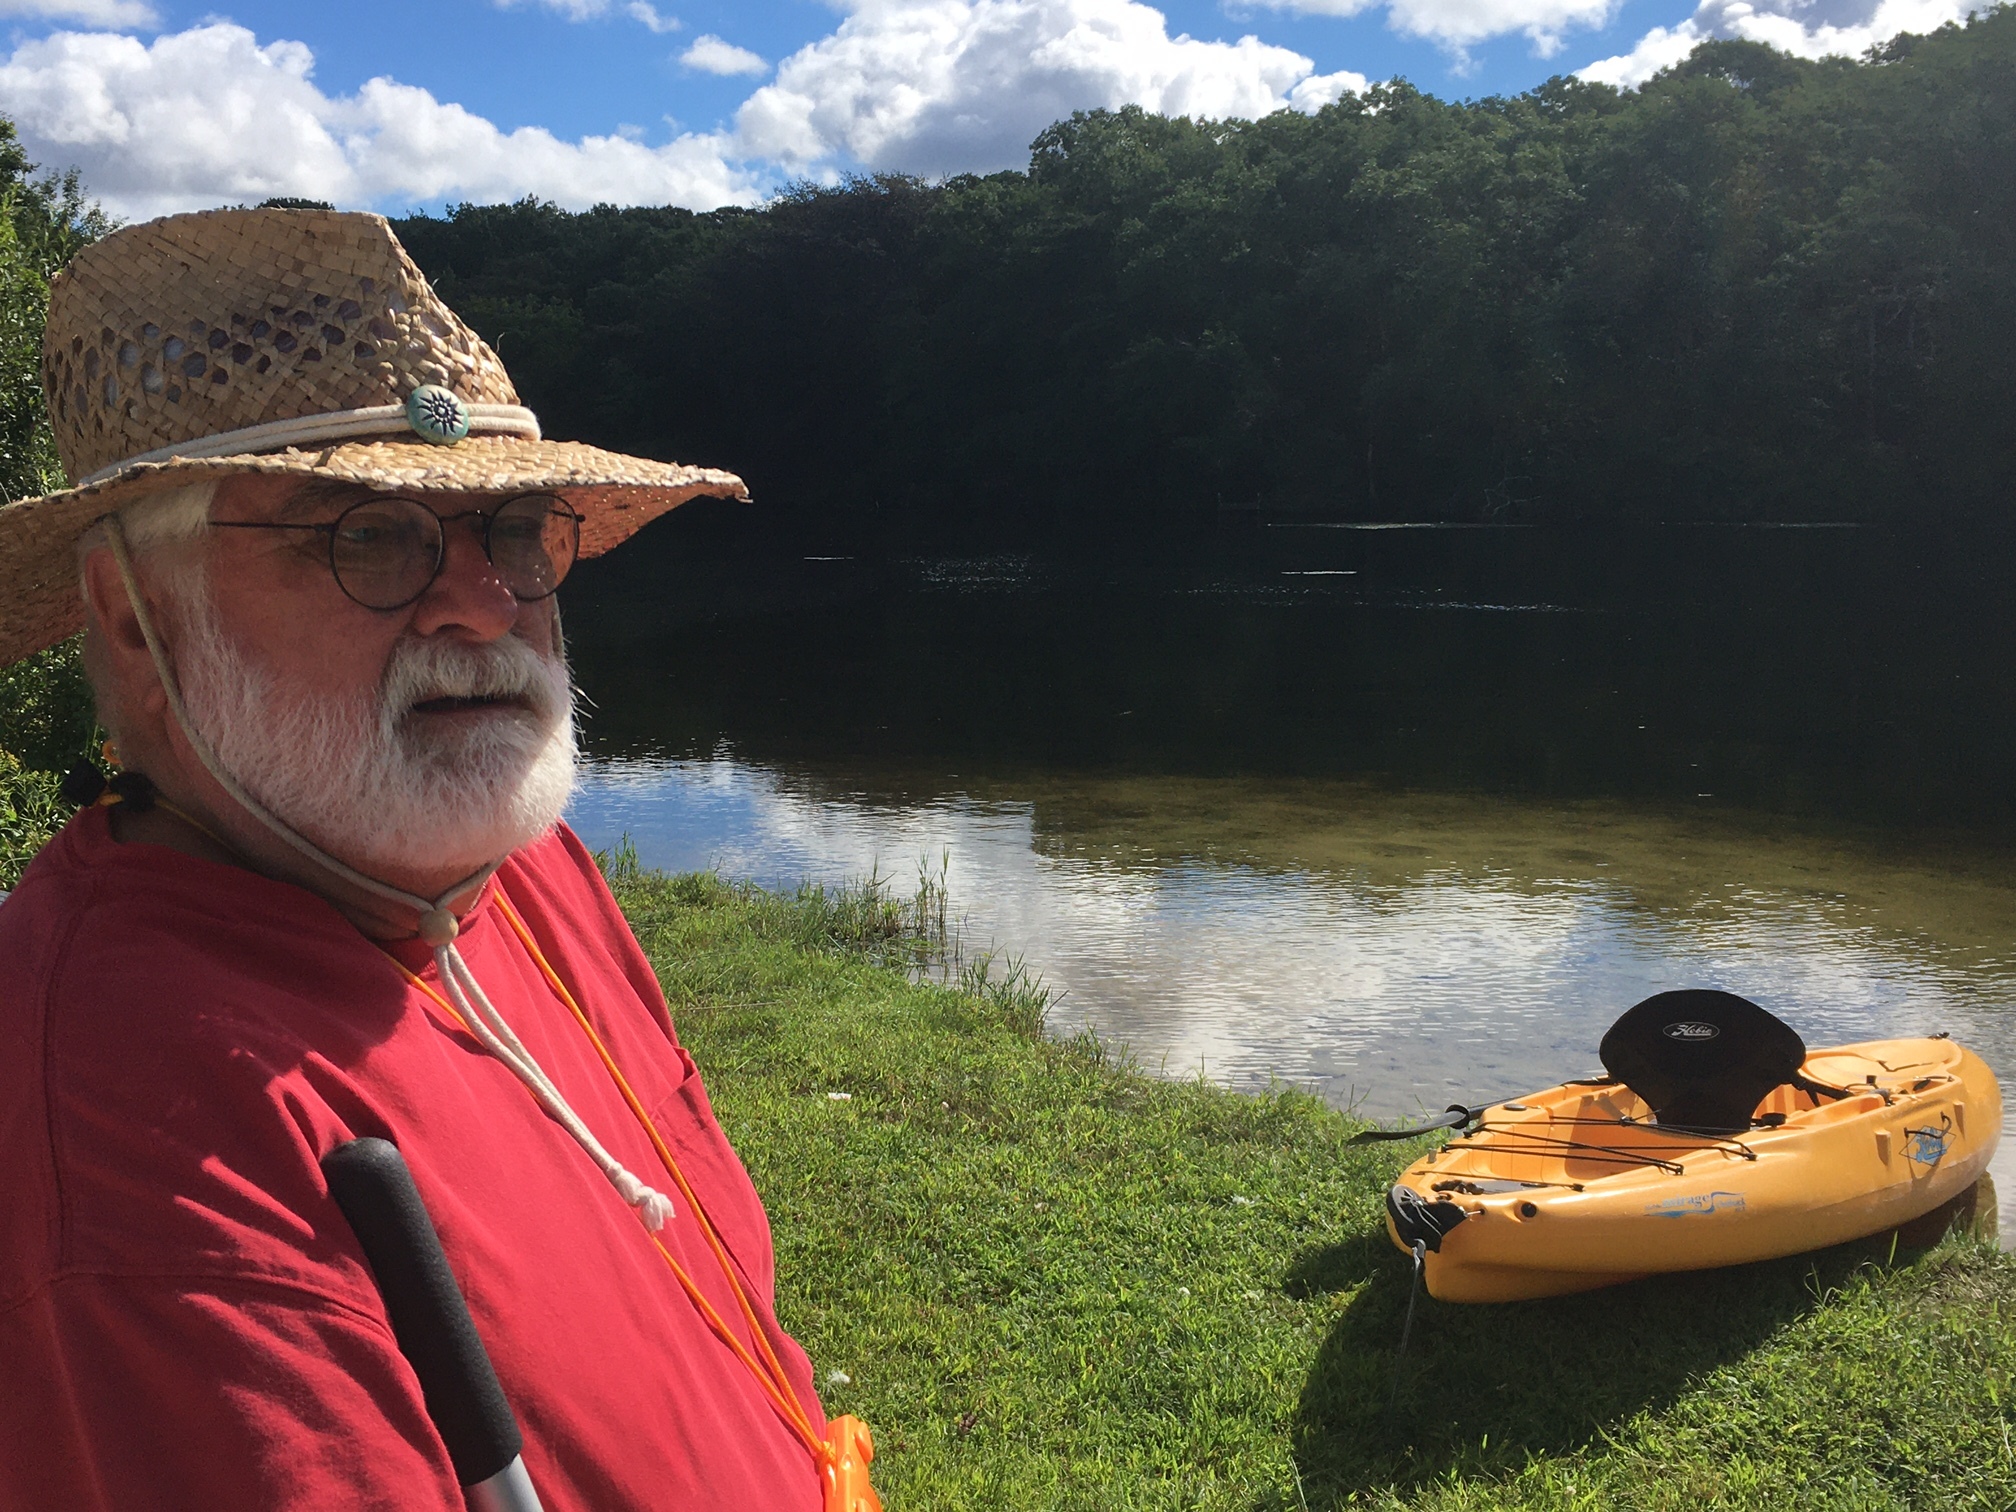 Robert Mozer at East Pond in Eastport. East Pond is among the study areas in the Adopt A Pond study